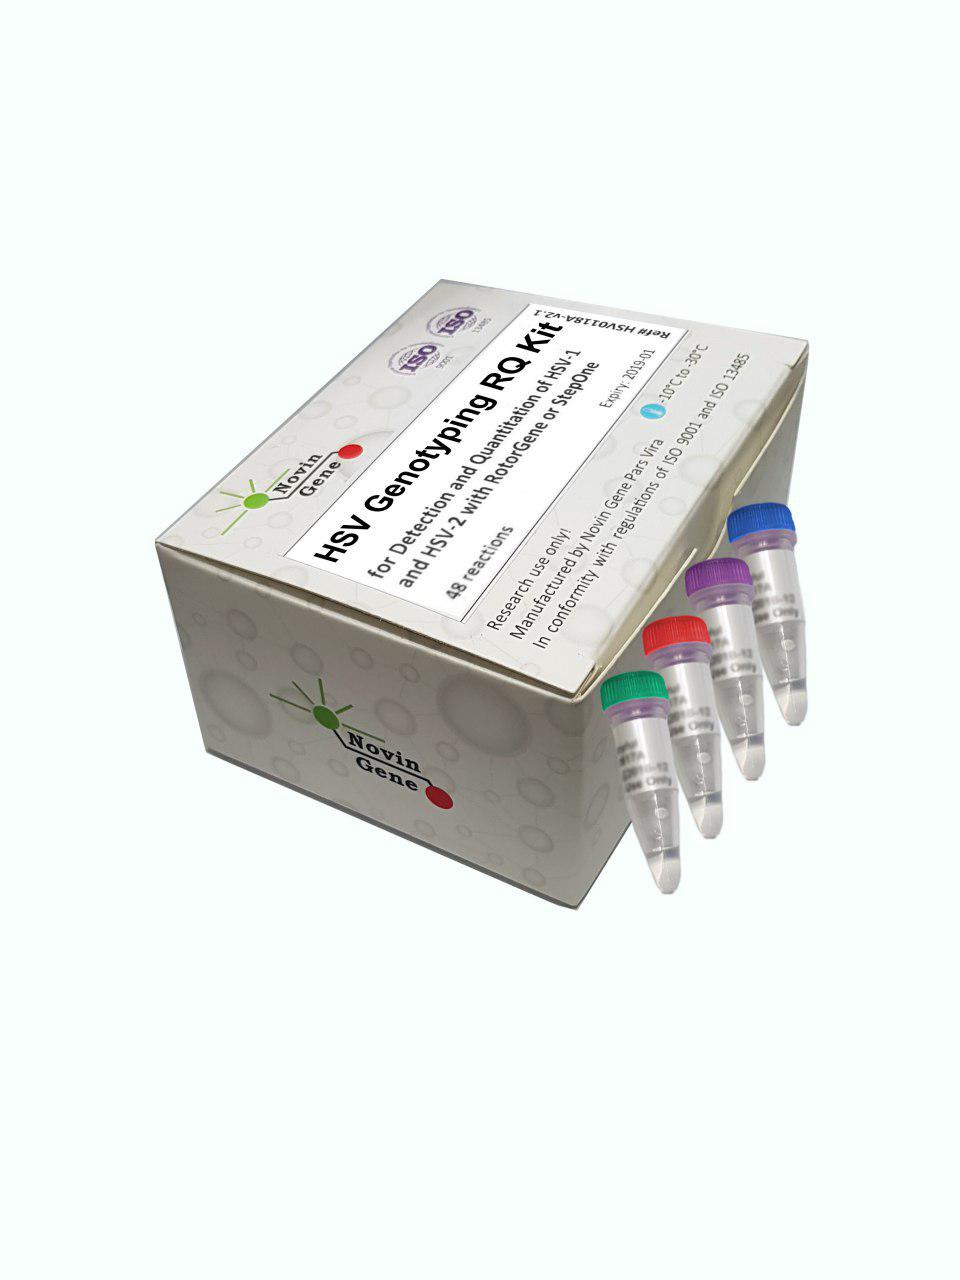 HSV 1 and 2 Detection and Genotyping kit 24rxn